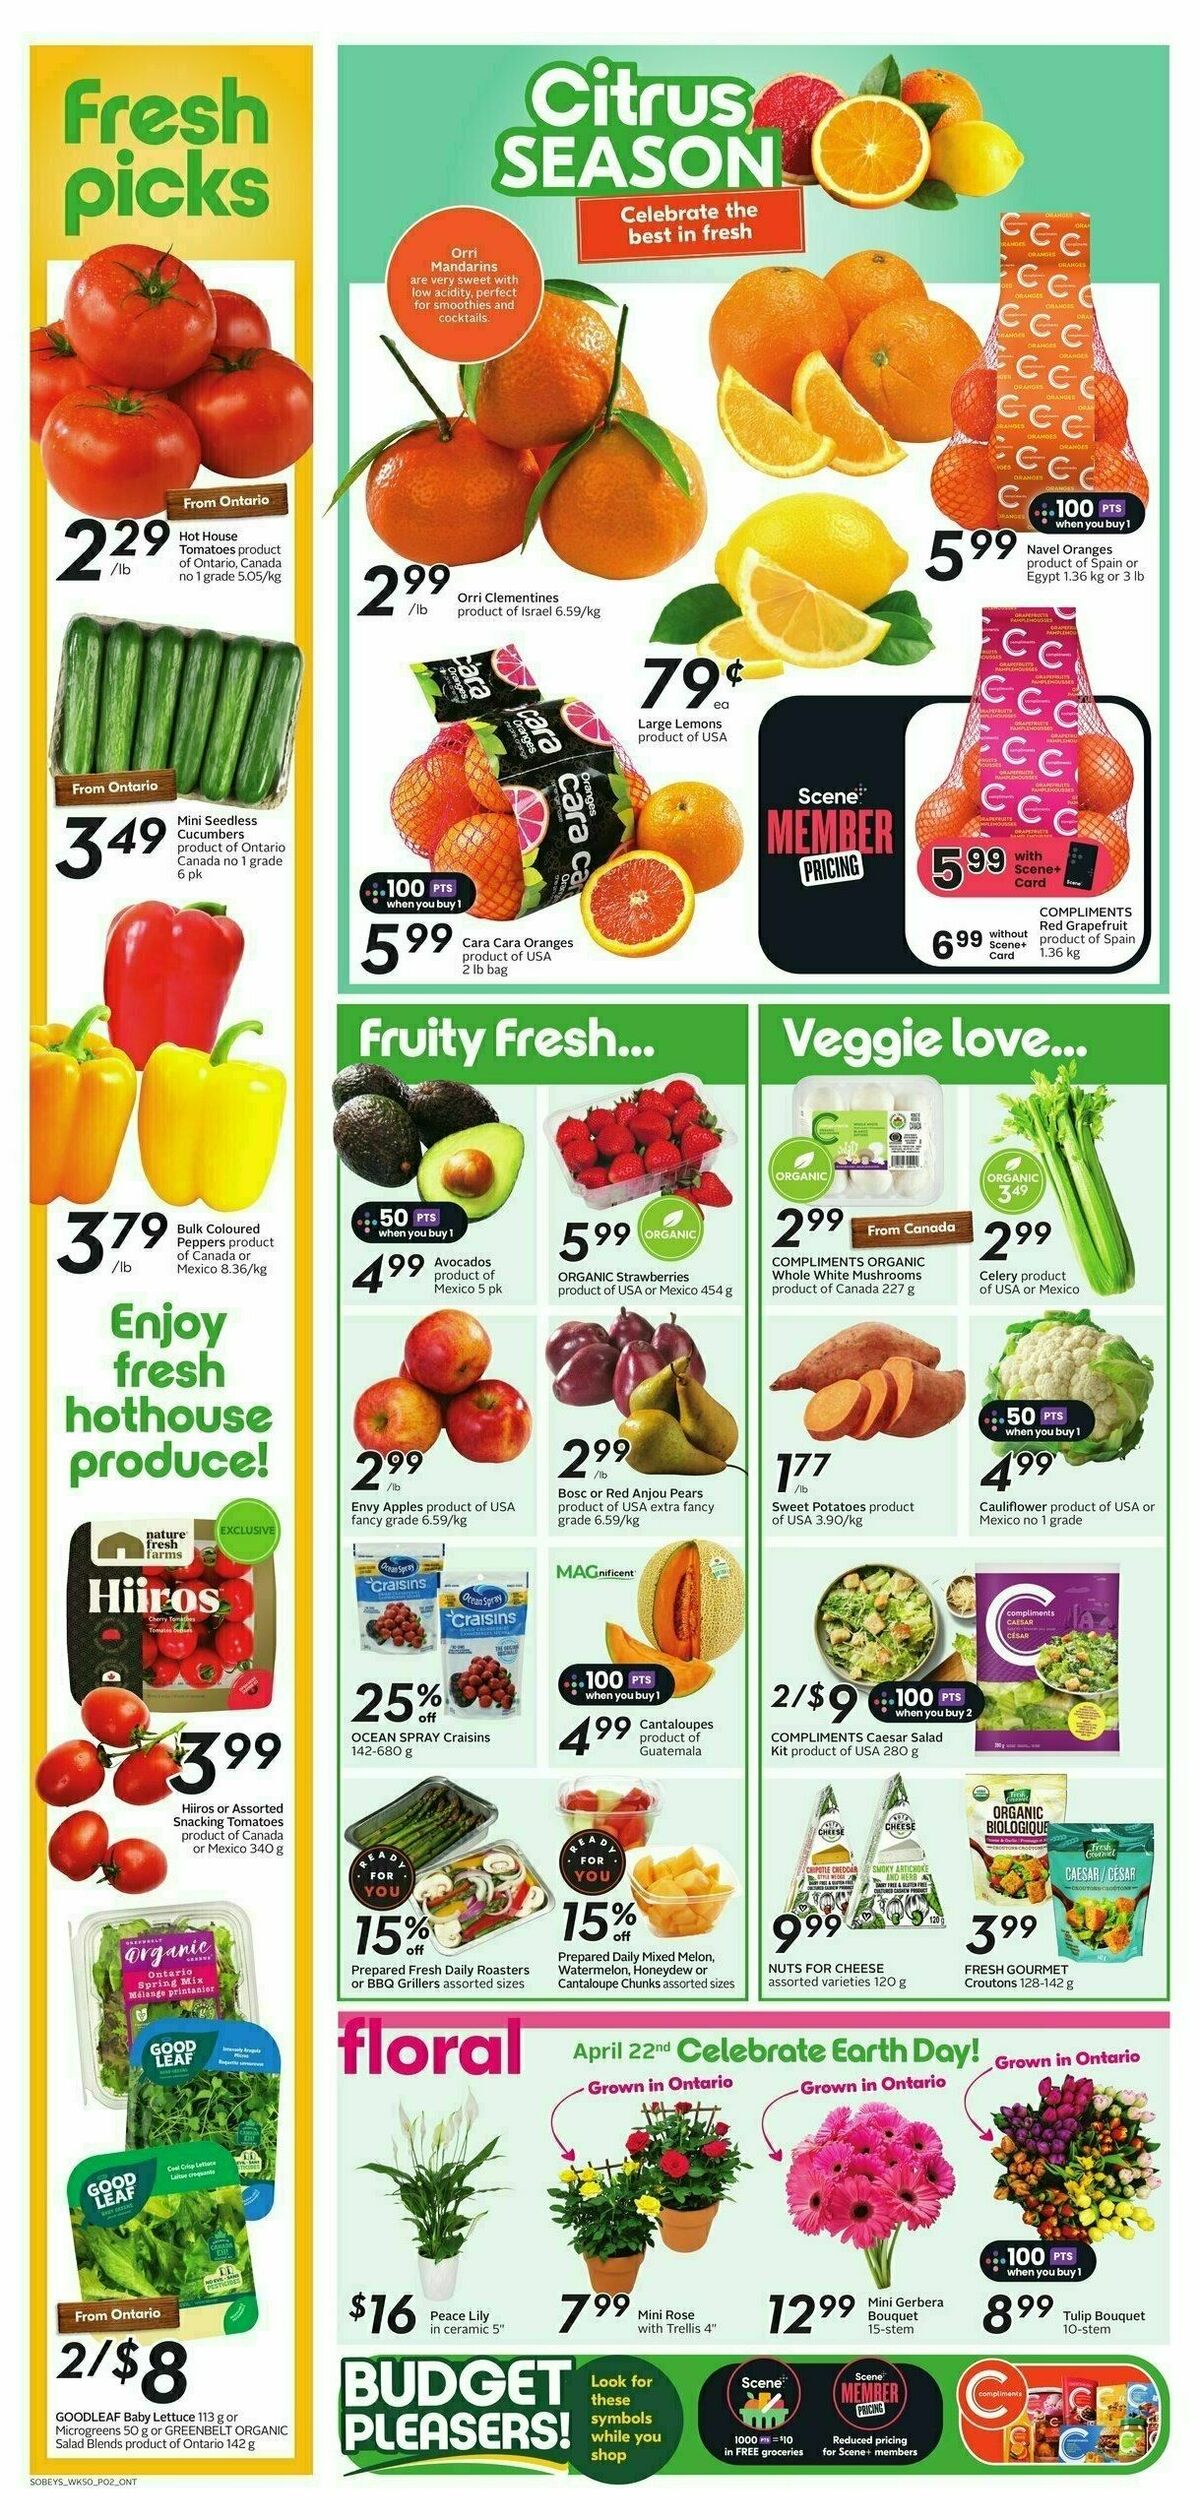 Sobeys Flyer from April 11